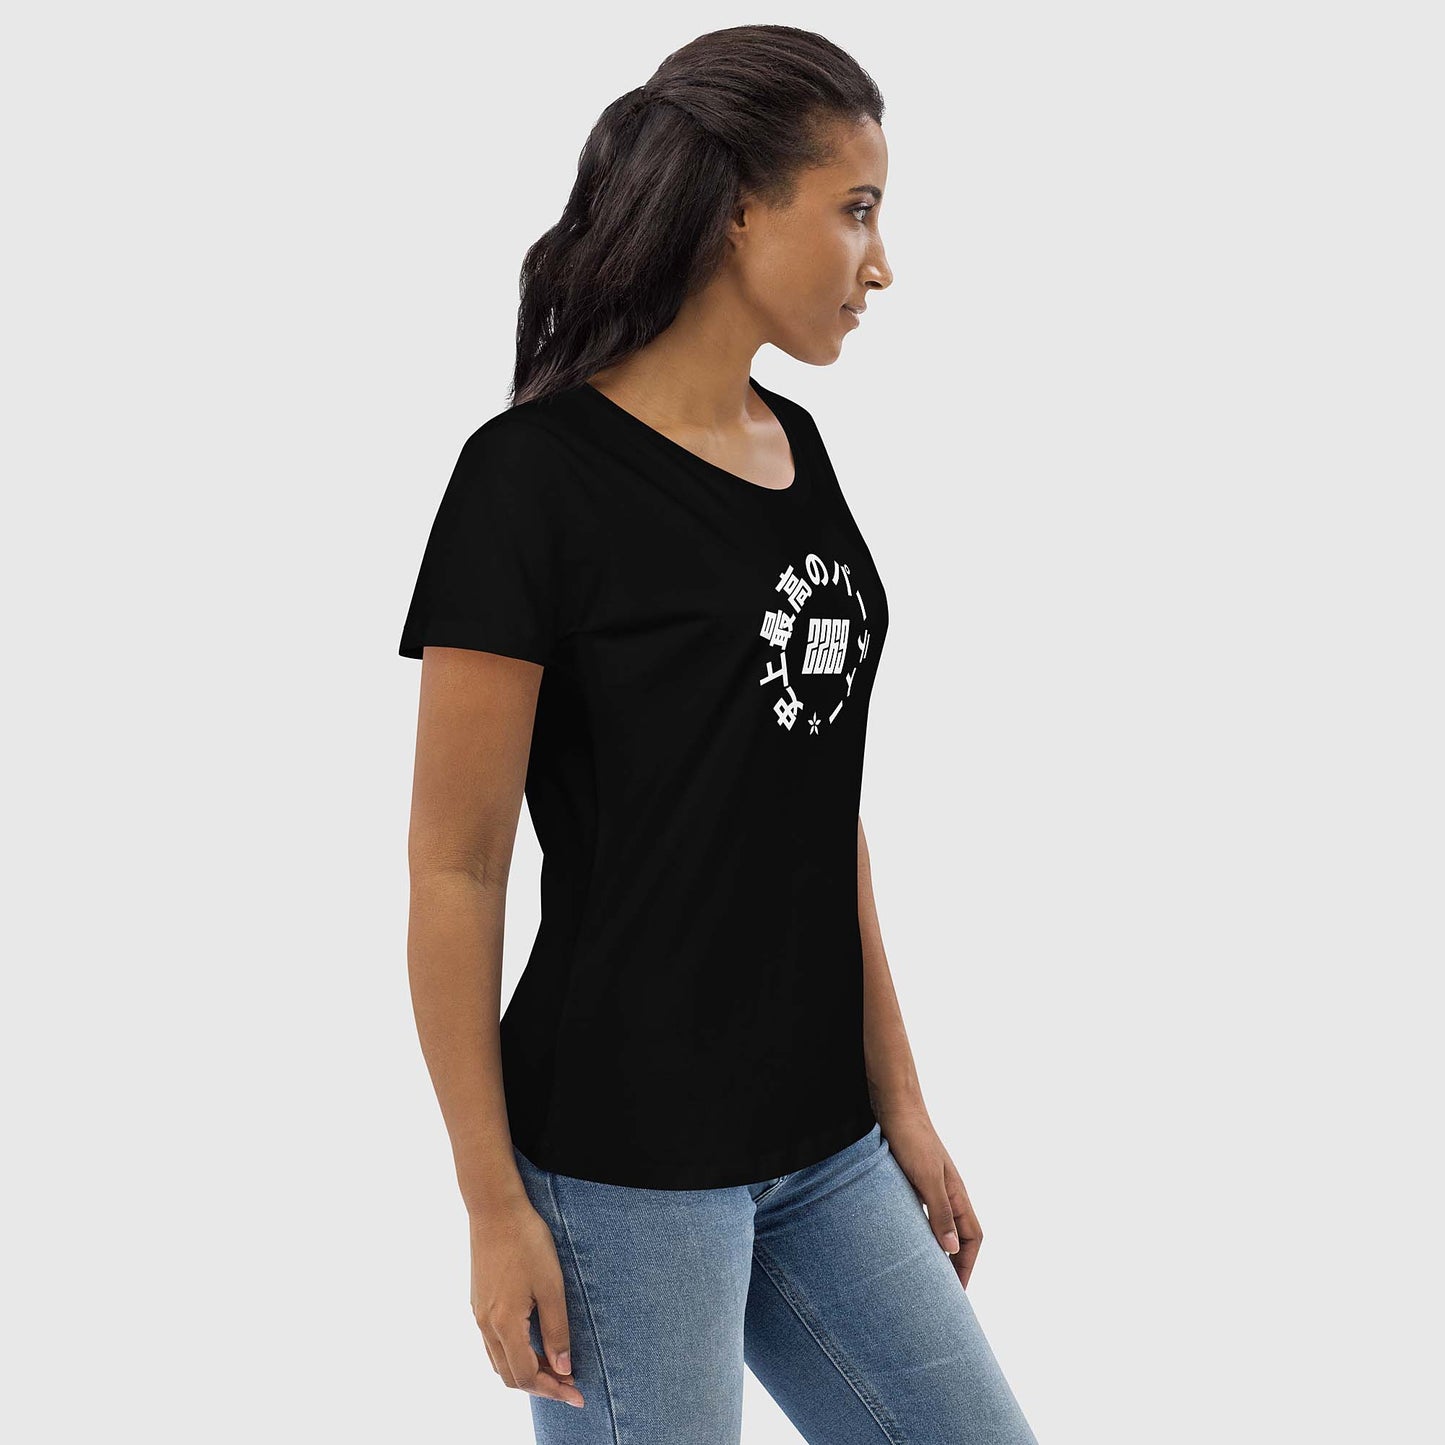 Women's black fitted organic cotton t-shirt with Japanese 2269 party circle